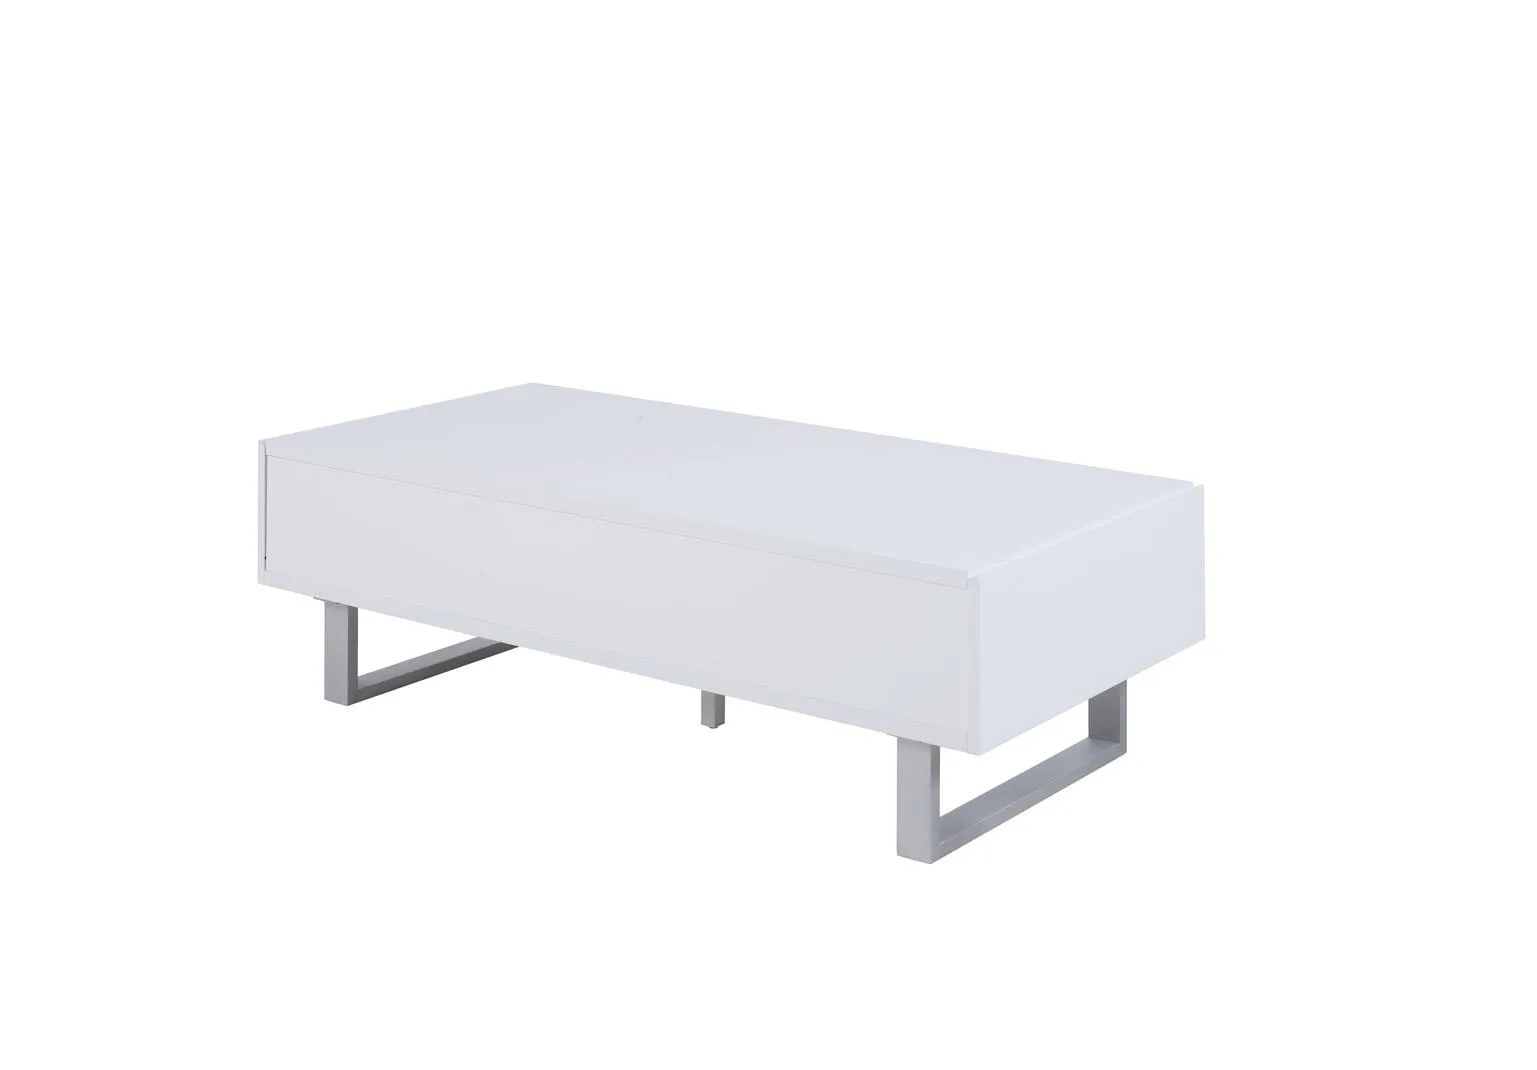 COFFEE TABLE GLOSSY WHITE HIGH GLOSSY